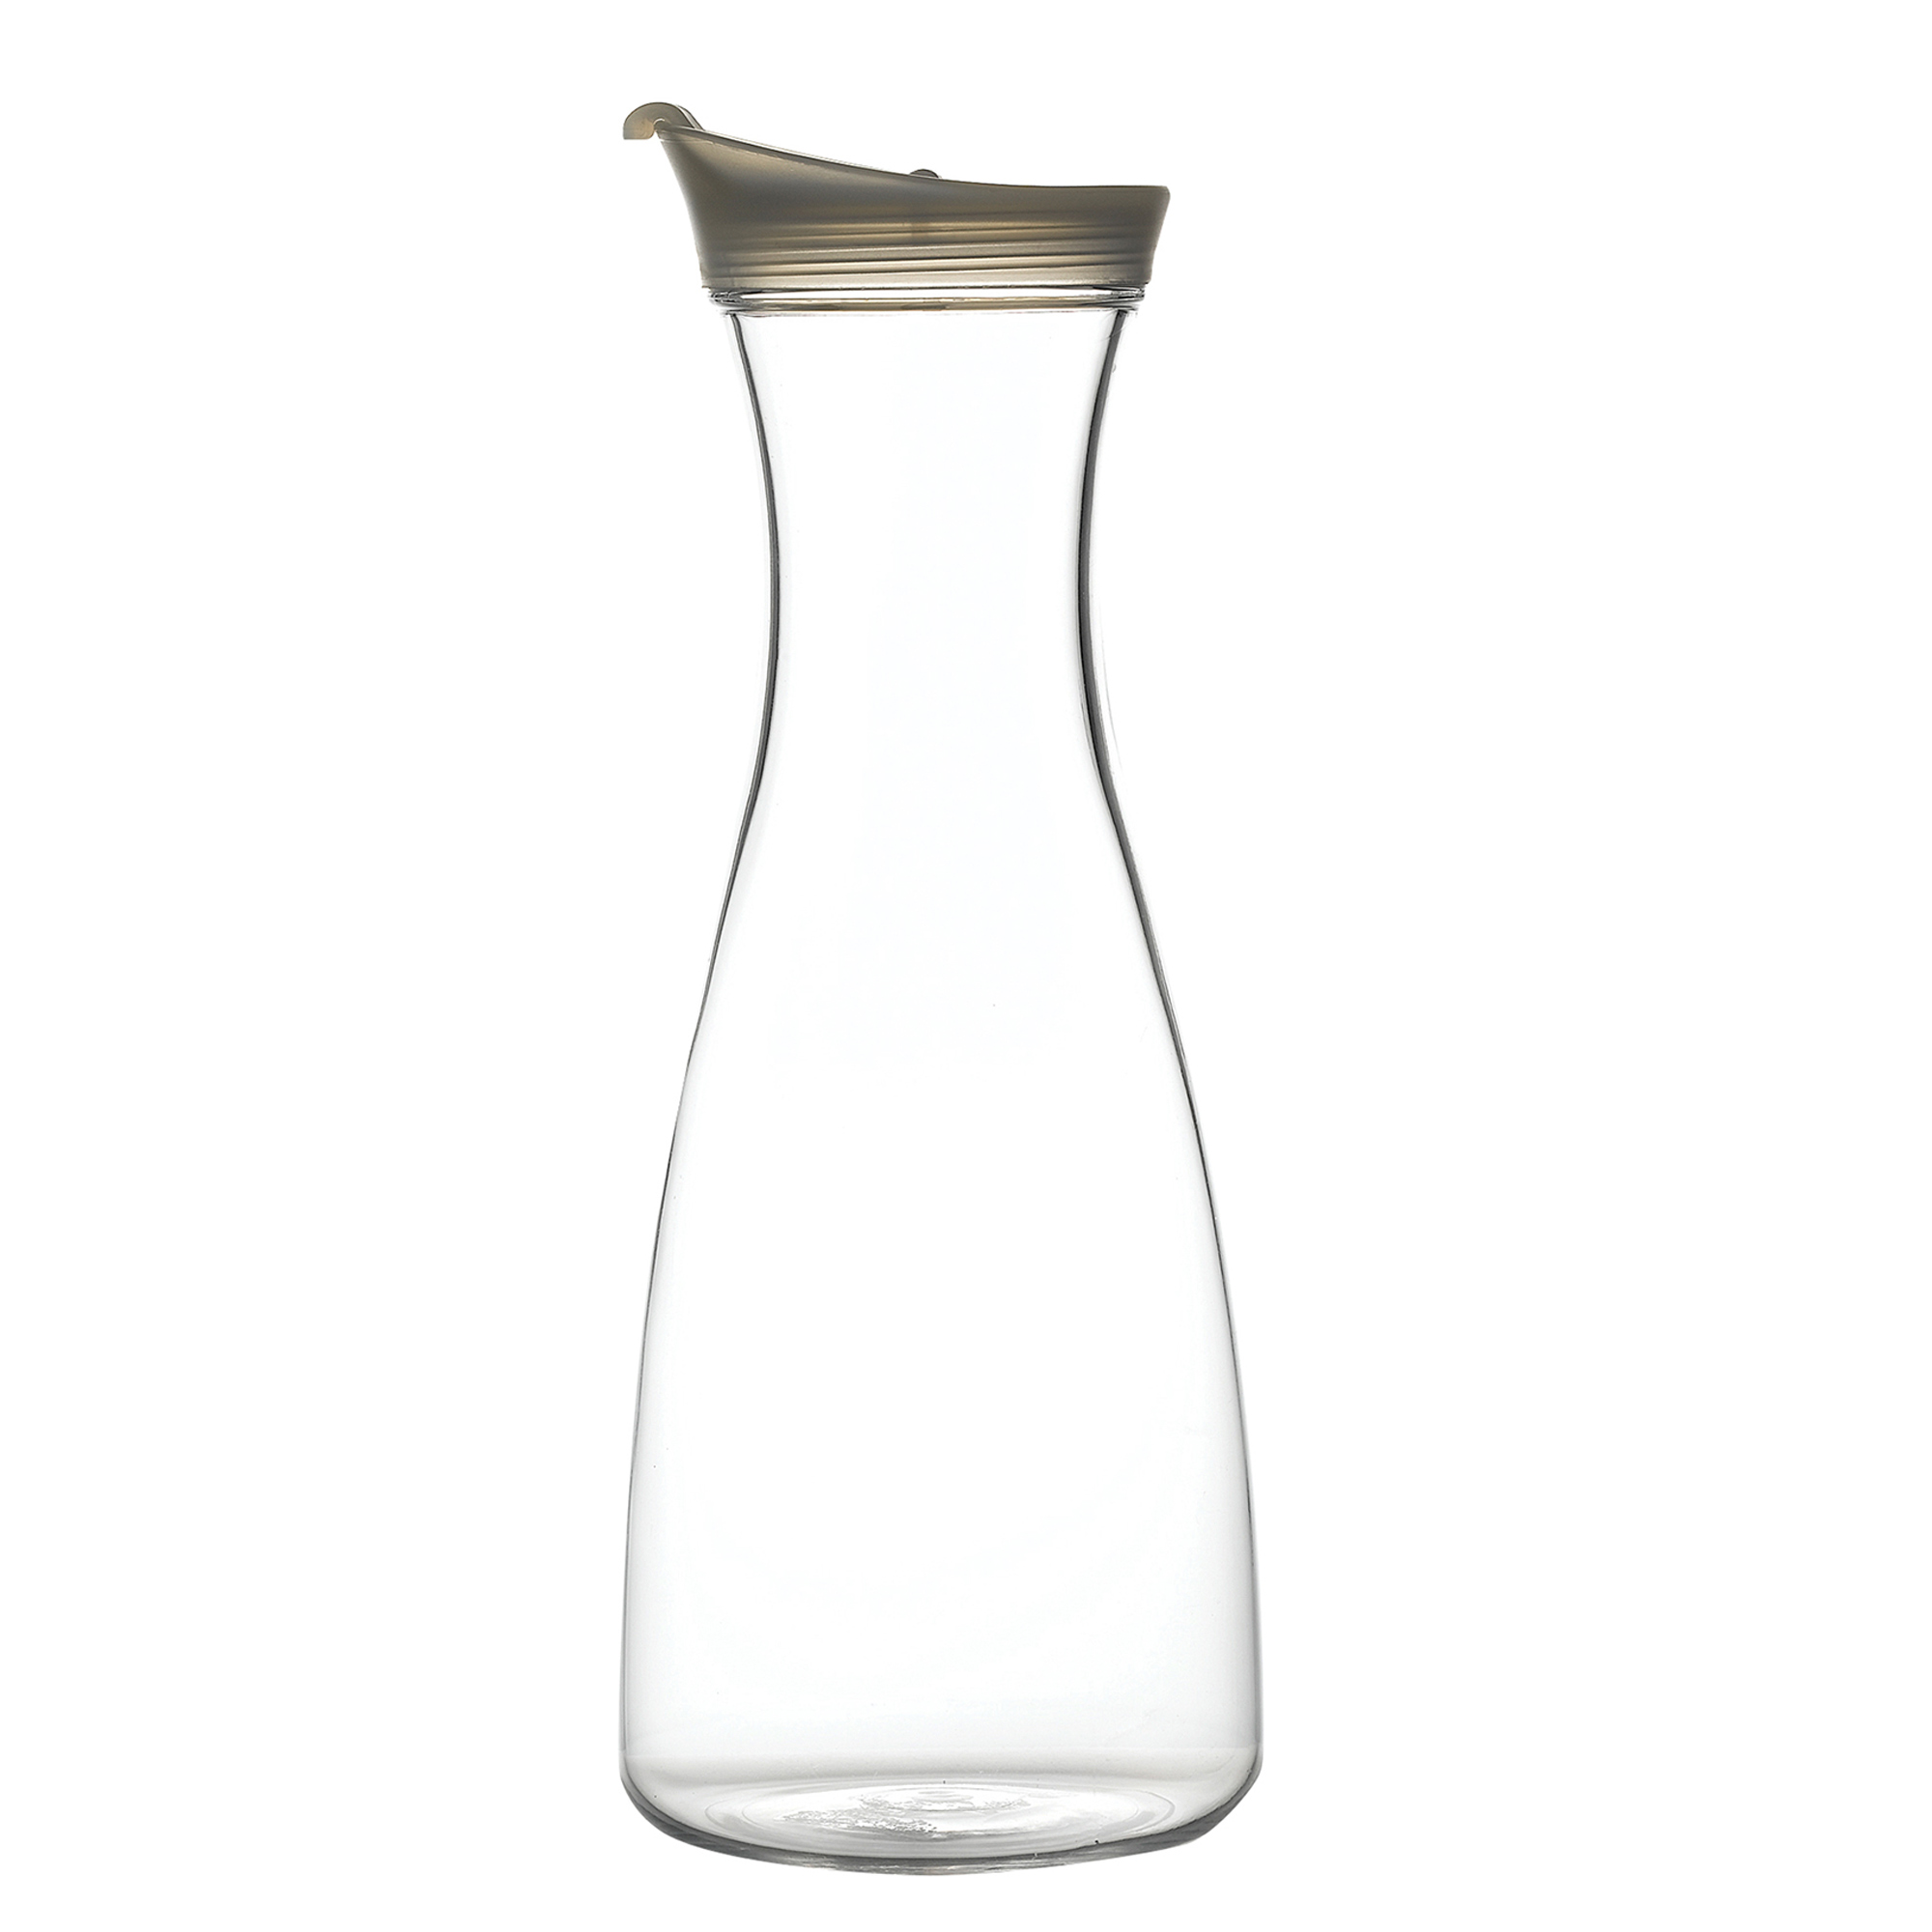 Acrylic Carafe with White Pouring Lid at drinkstuff